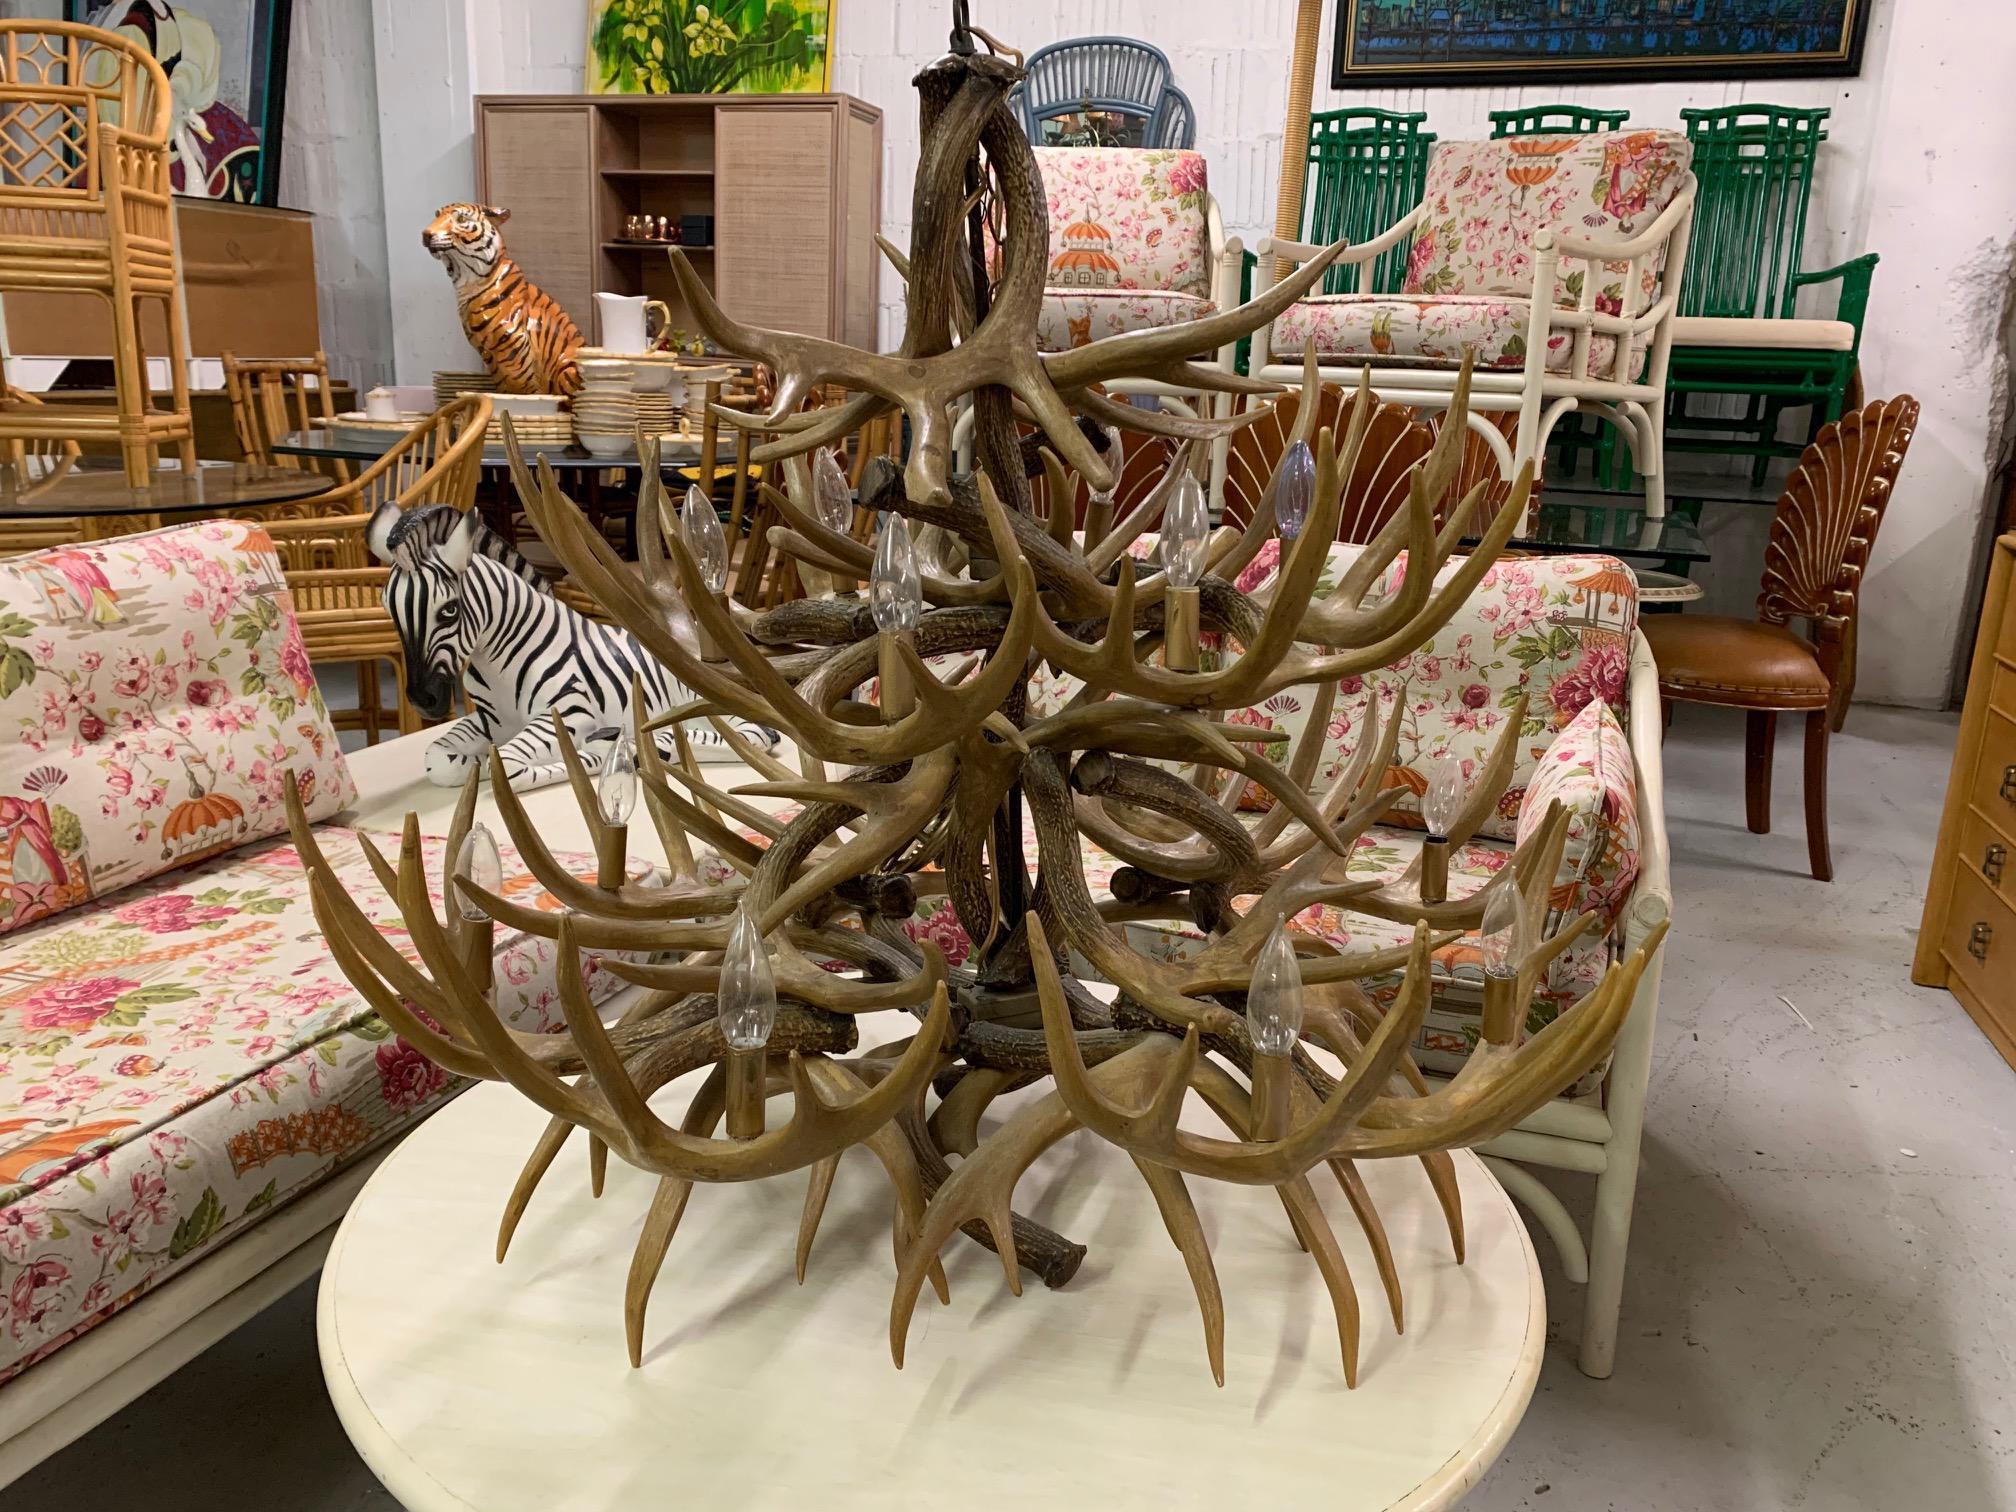 Large antler chandelier features 14 lights and dozens of stag antlers. Hand made in the mid-20th century. Very good vintage condition with no flaws to speak of, and a warm natural patina.
 